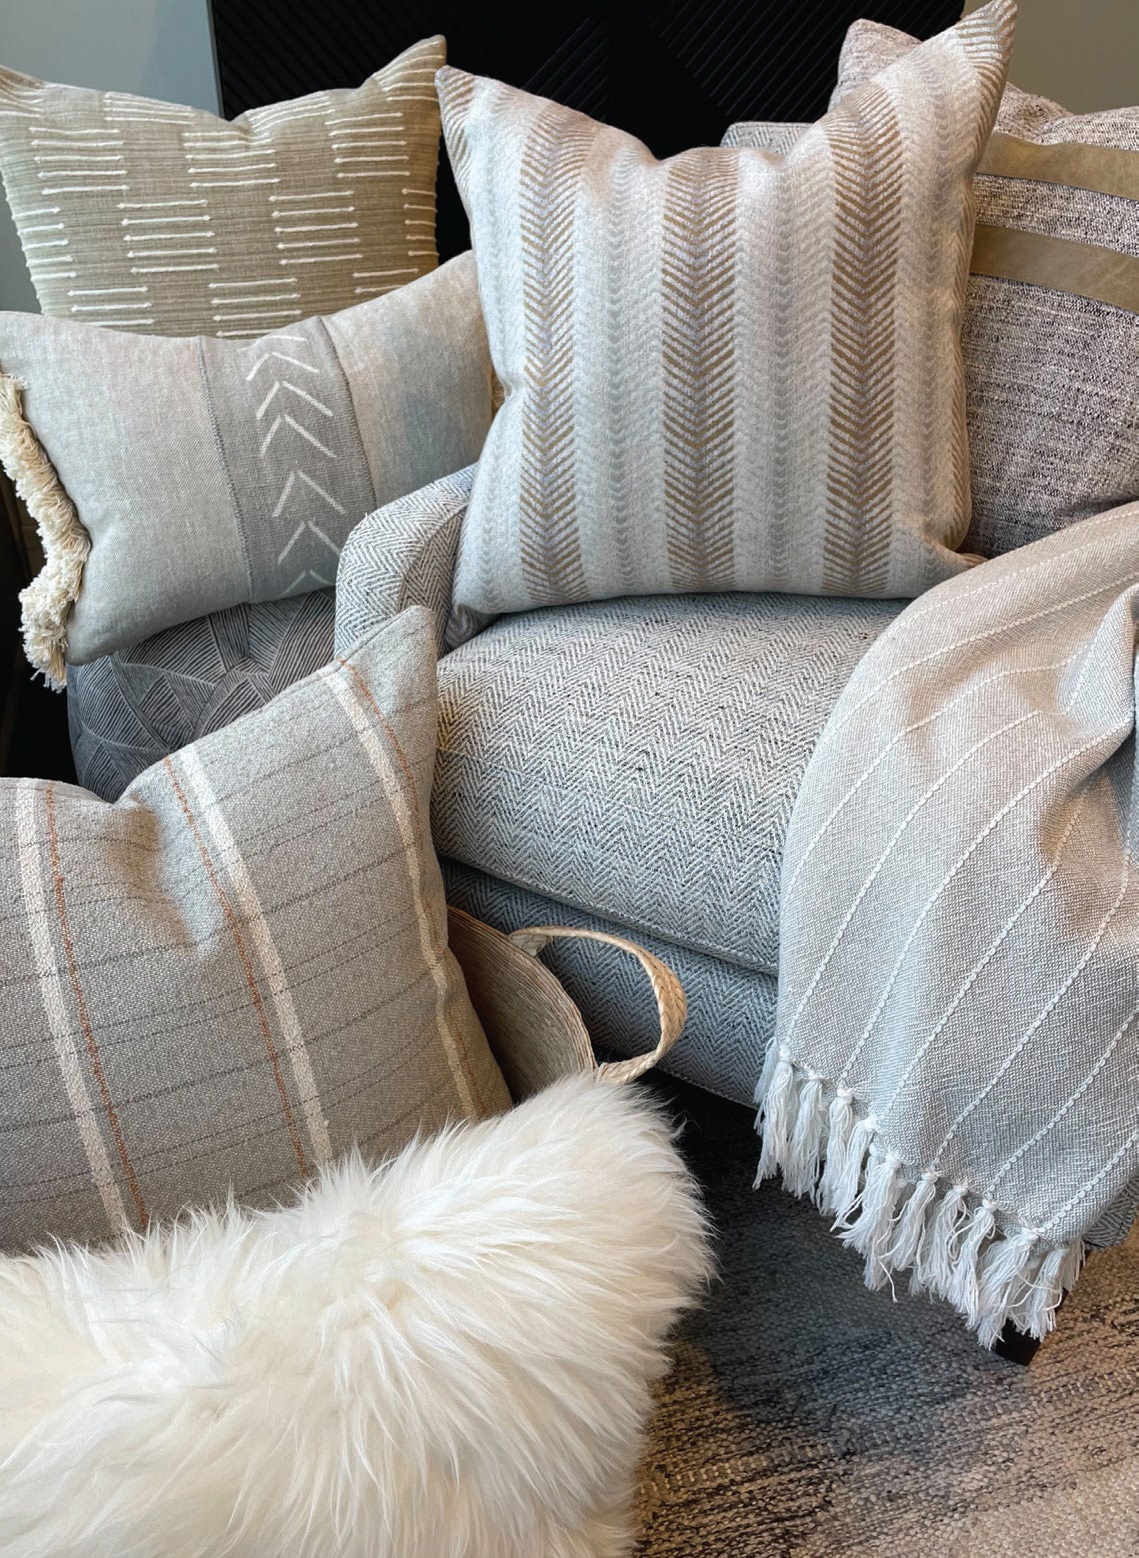 Neutral pillows from HOST Interiors. PHOTO COURTESY OF HOST